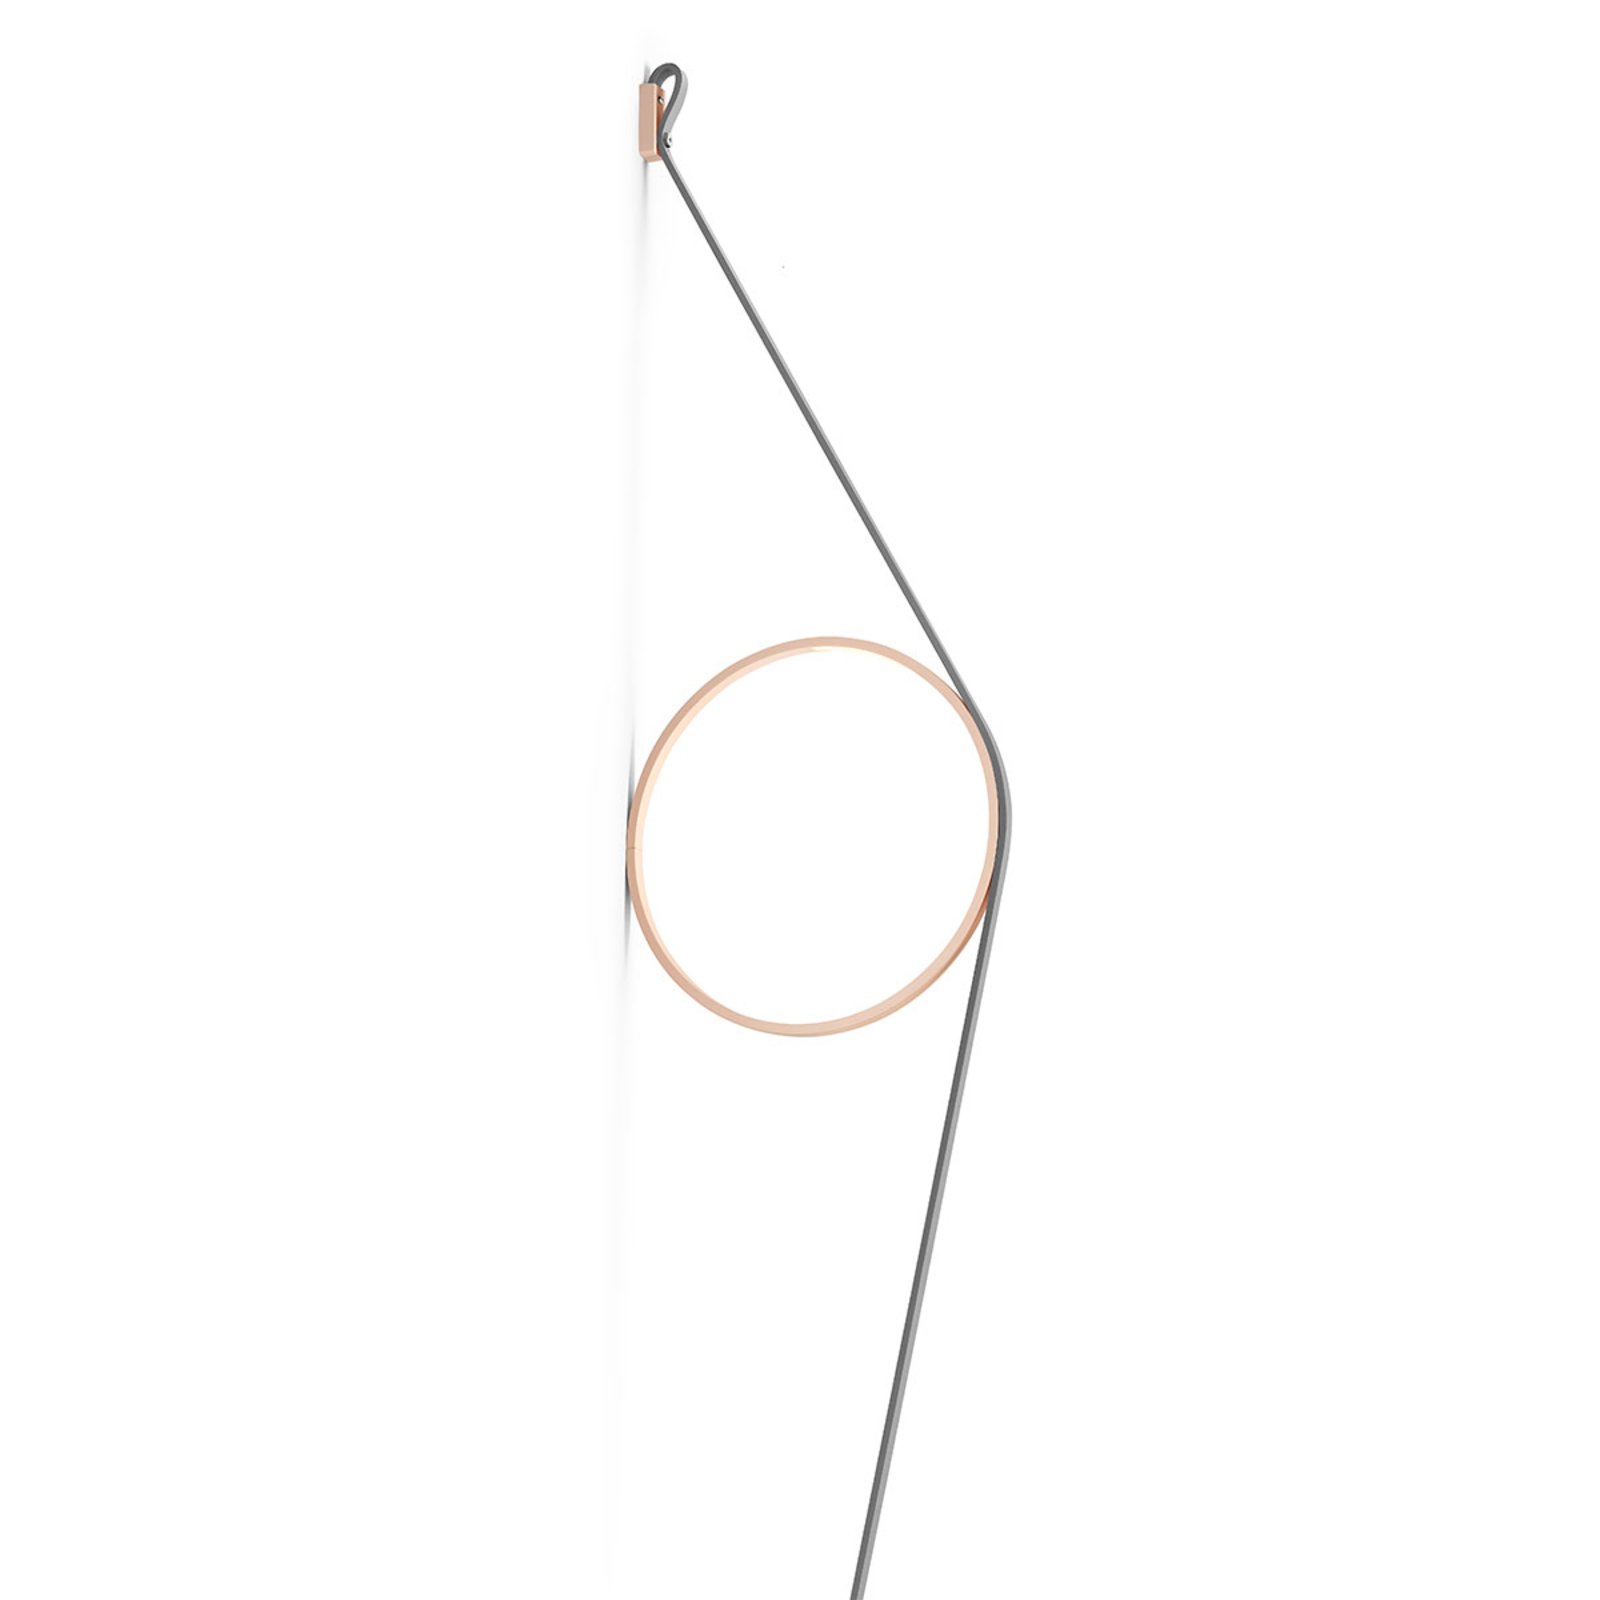 FLOS Wirering grey LED wall light, ring magenta